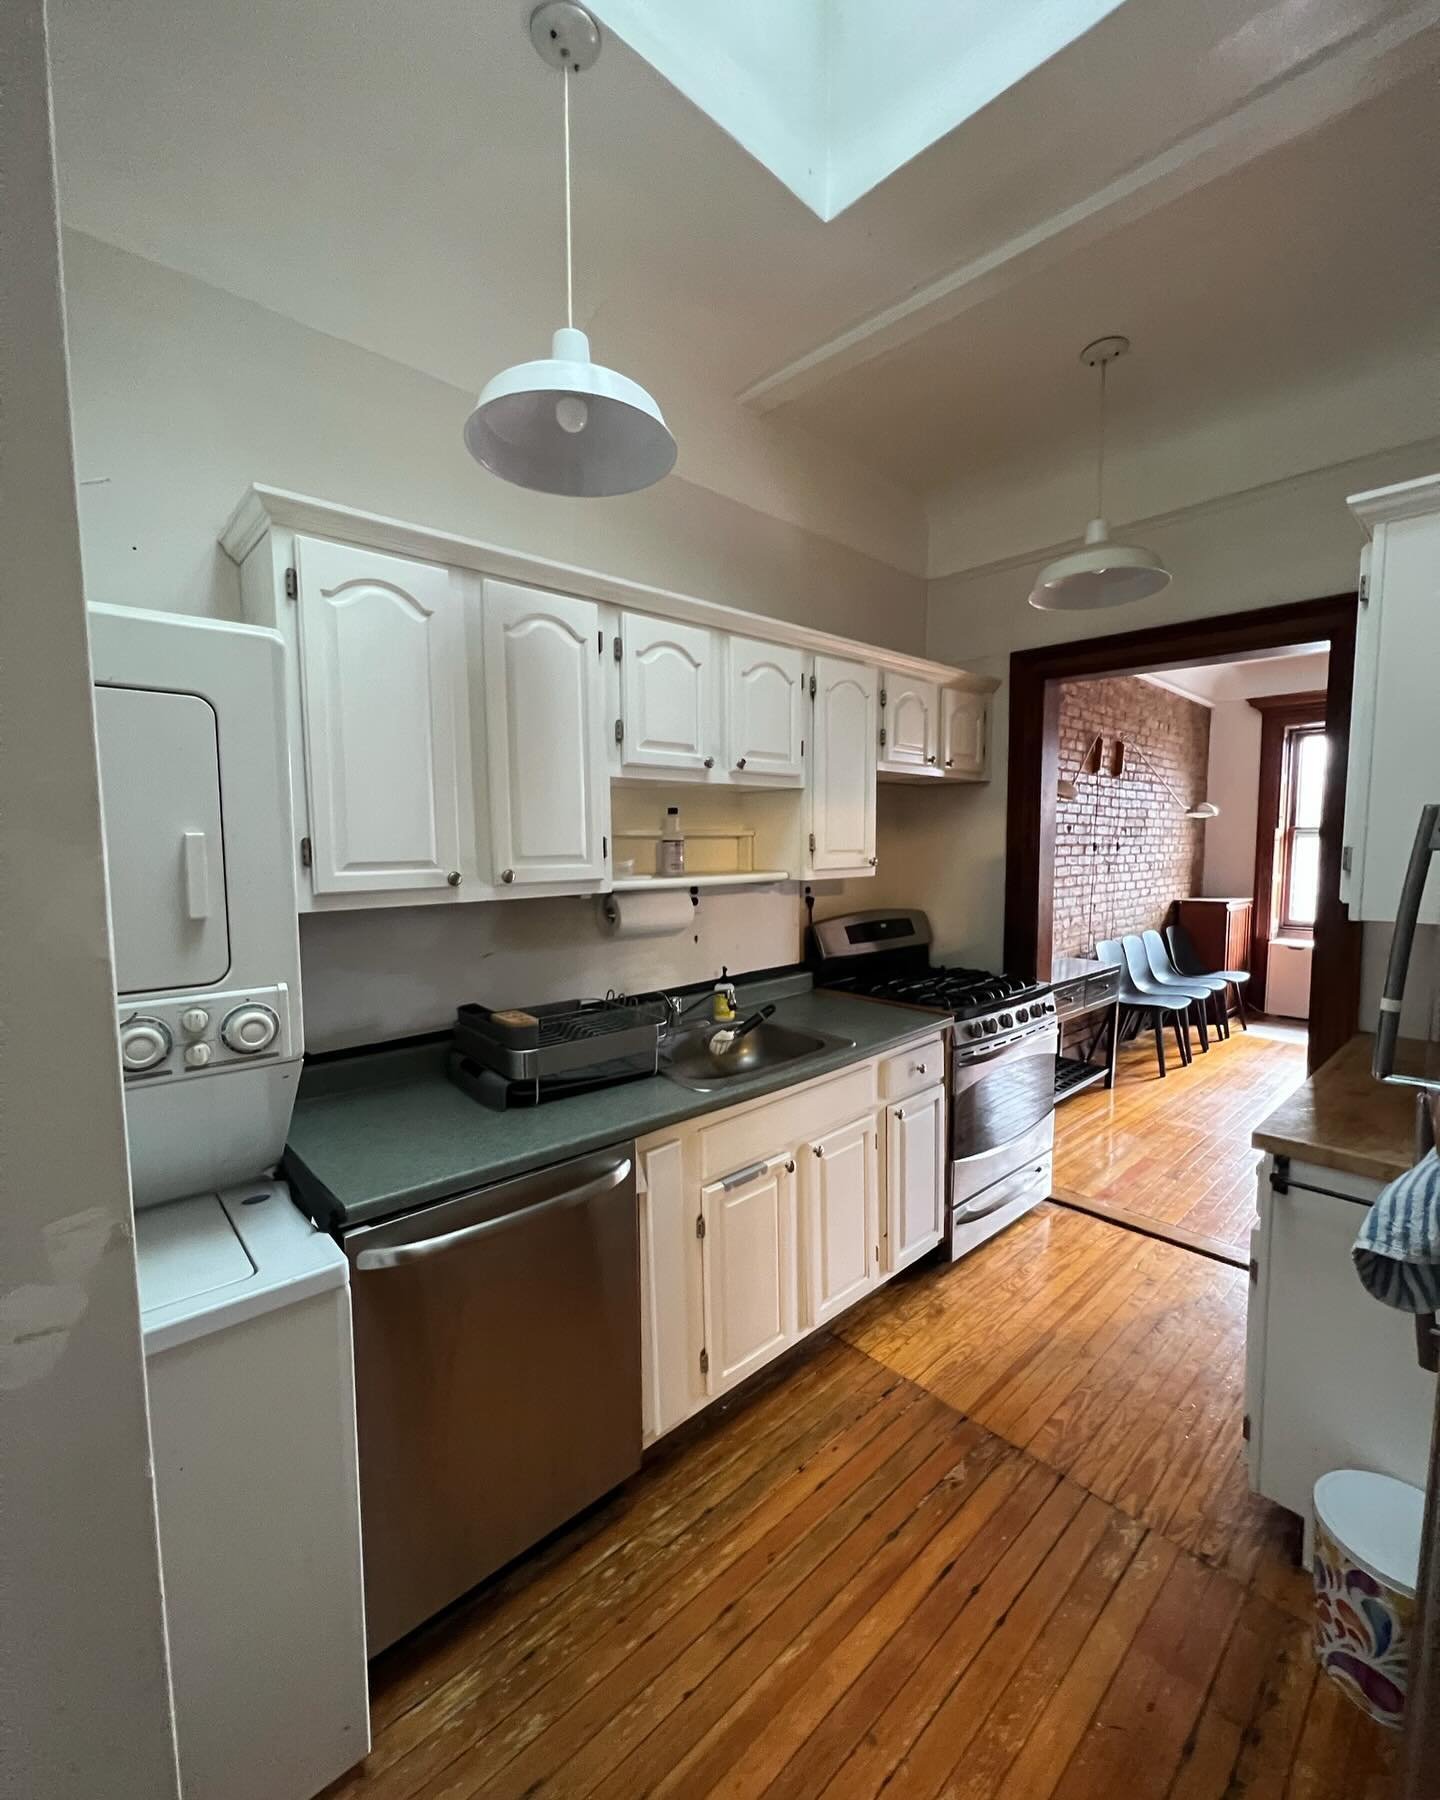 Swipe left to see the before-and-after of our Prospect Park Kitchen renovation. We&rsquo;re just getting started, but the difference is already staggering. 

#RenovationProject #Transformation #KitchenMakeover